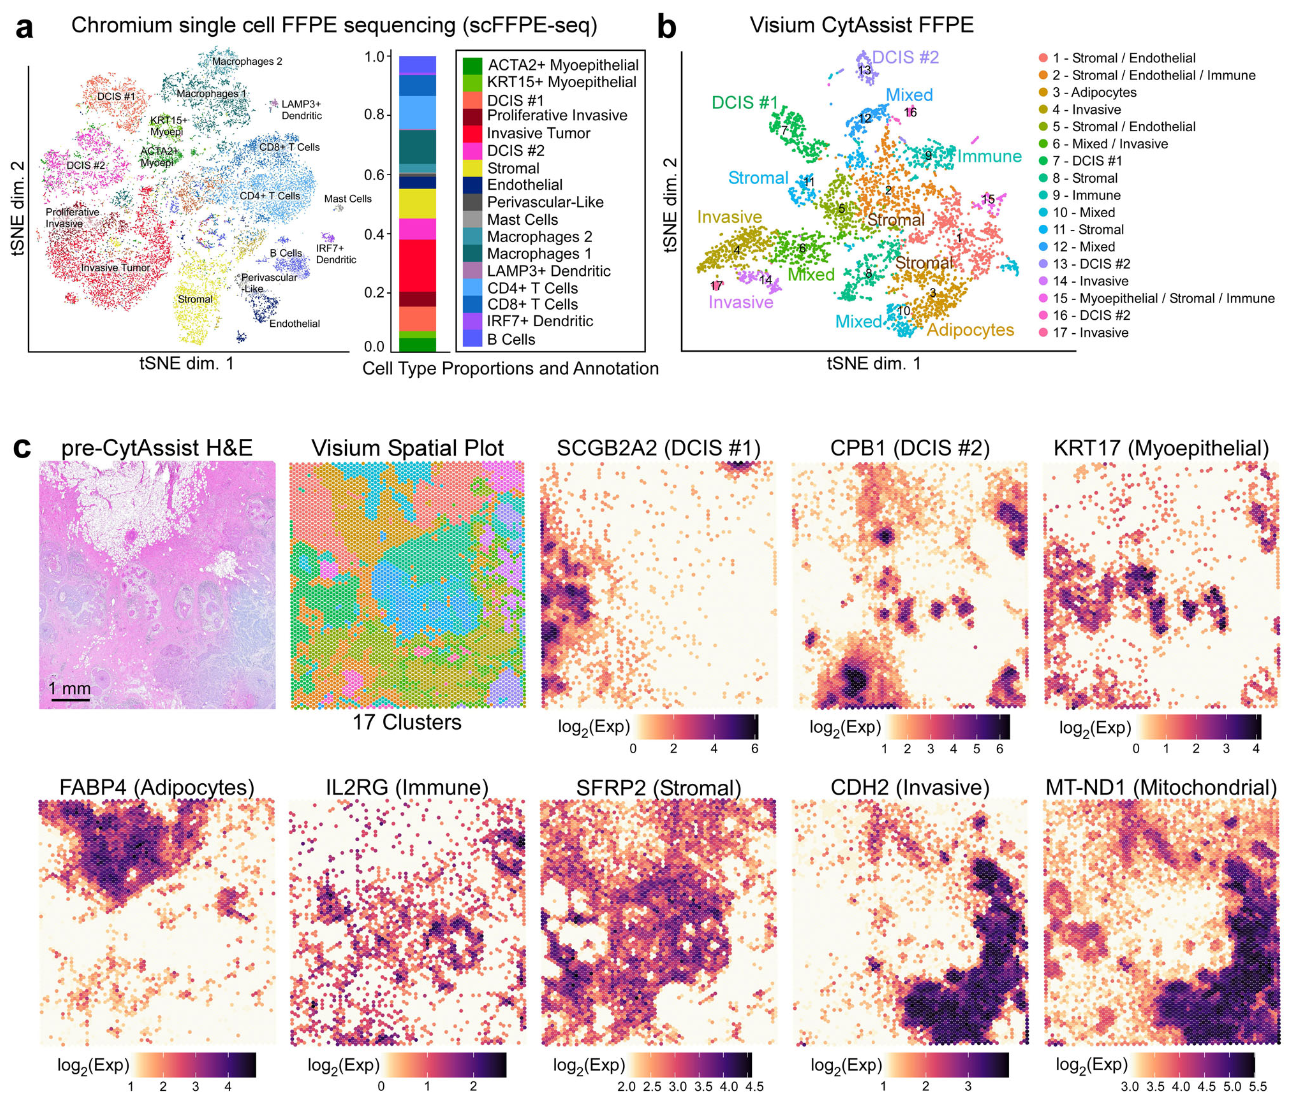 Figure 9. Characterization of an FFPE-preserved breast cancer sample using whole transcriptome single cell and spatial technologies. (a) Dimension reduction of the scFFPE-seq data yielded a t-SNE projection with 17 unsupervised clusters. (b) t-SNE projection of Visium spots also identifies 17 clusters. Based on differential gene expression analysis, ten clusters could be unequivocally assigned to cell types, while the others were mixtures of cell types. (c) H&E staining conducted pre-CytAssist is shown for reference alongside the spatial distribution of clusters in (b). Cell-type-specific marker genes are expressed as log2(normalized UMI counts). The Visium data elucidated the spatial location of two molecularly distinct DCIS and invasive subtypes and the general locations of immune, myoepithelial, adipocytes, and stromal cells. Additionally, Visium features mitochondrial probes (e.g., MT-ND1), and their spatial distribution correlates with the invasive region of the tissue section. This experiment was performed on two serial sections, with one representative section shown here. Image adapted from Figure 2 from Janesick et al. 2023. (CC BY 4.0). 